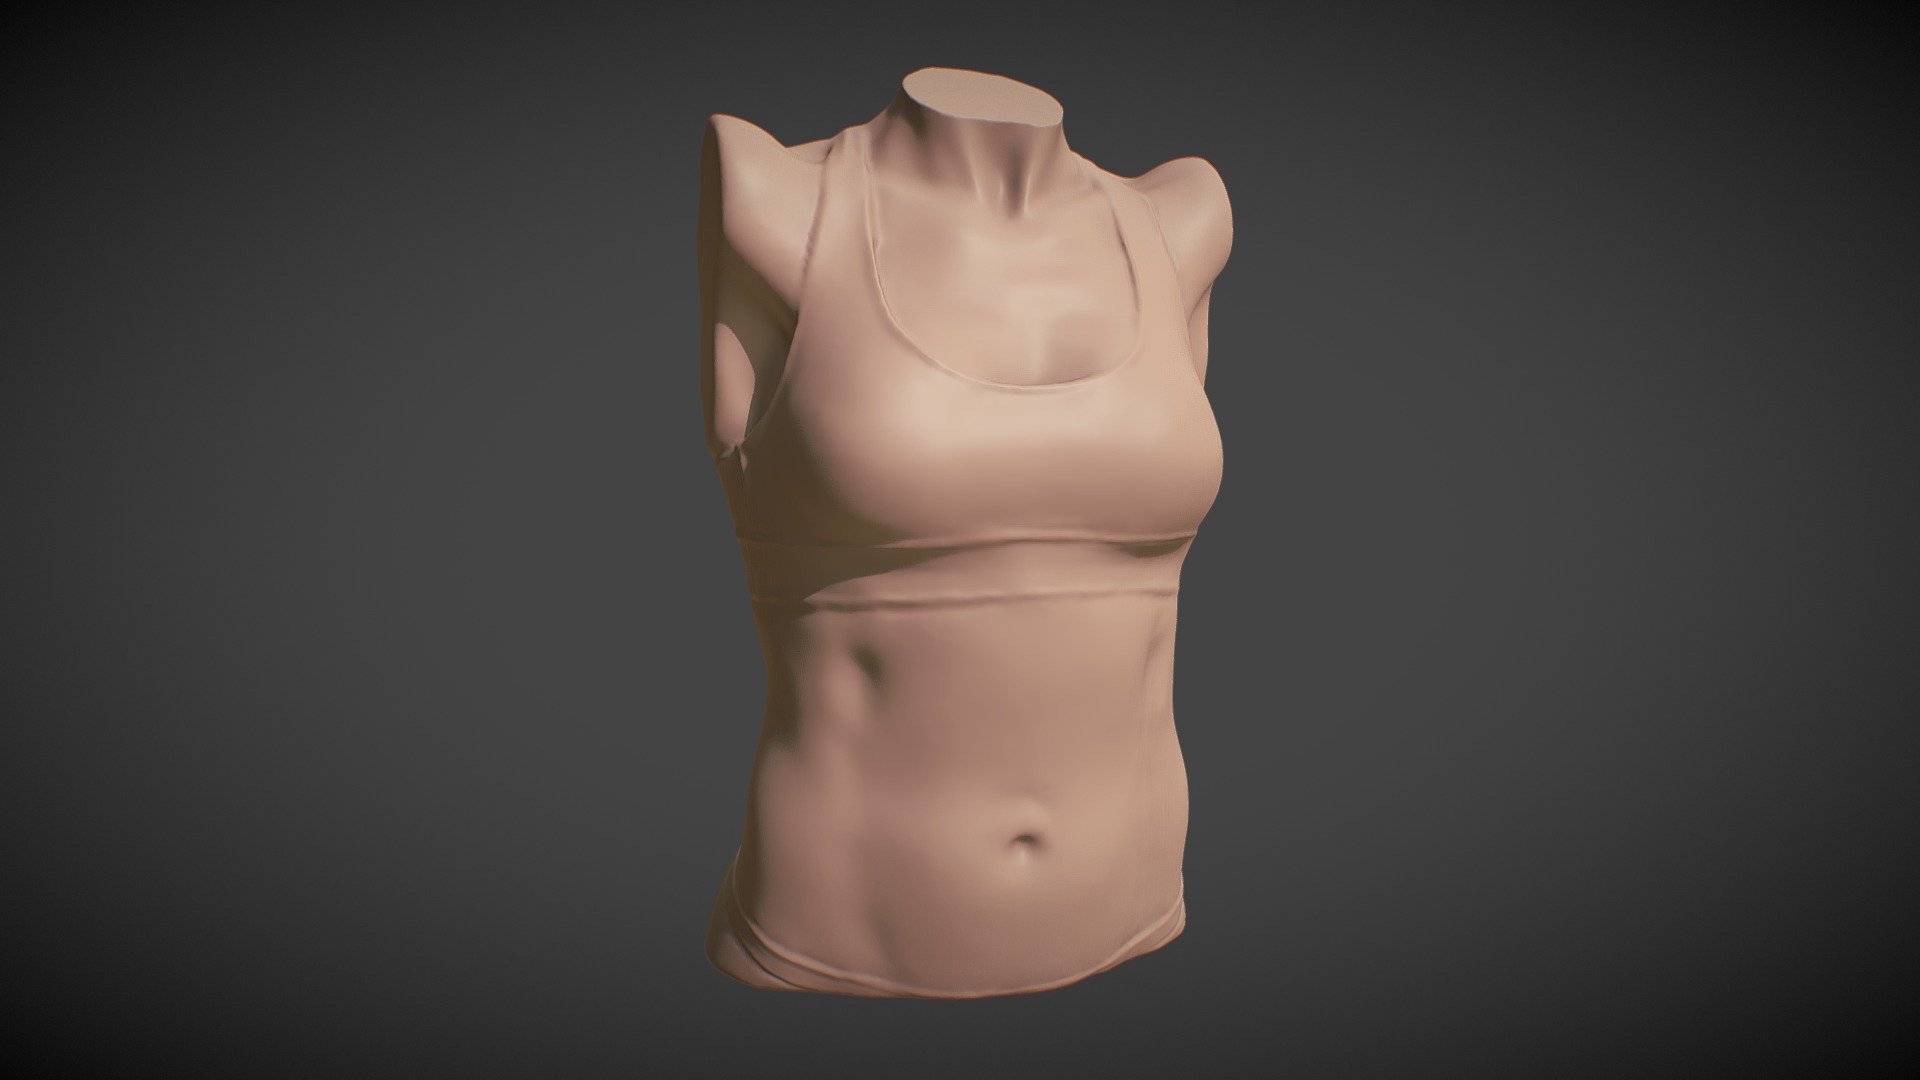 Sculpt January 2018 challenge
28. Female Torso |Time Spent - 90 min
Software Used - ZBrush

I used base model to make biceps pose and then I croped it in ZB 3d model